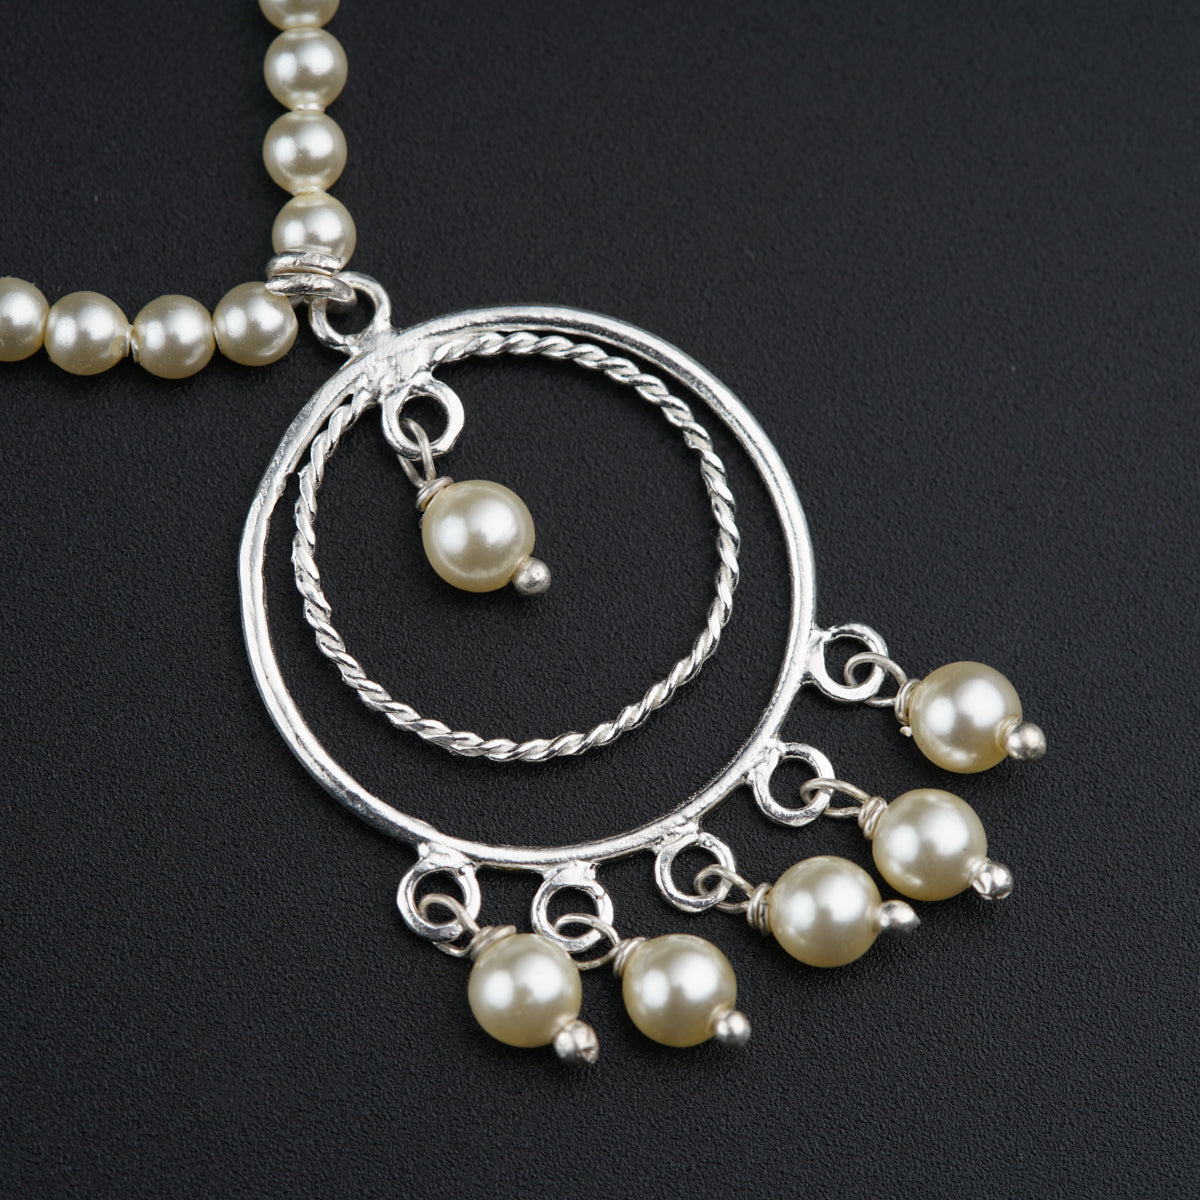 Handmade Silver Set with Pearls